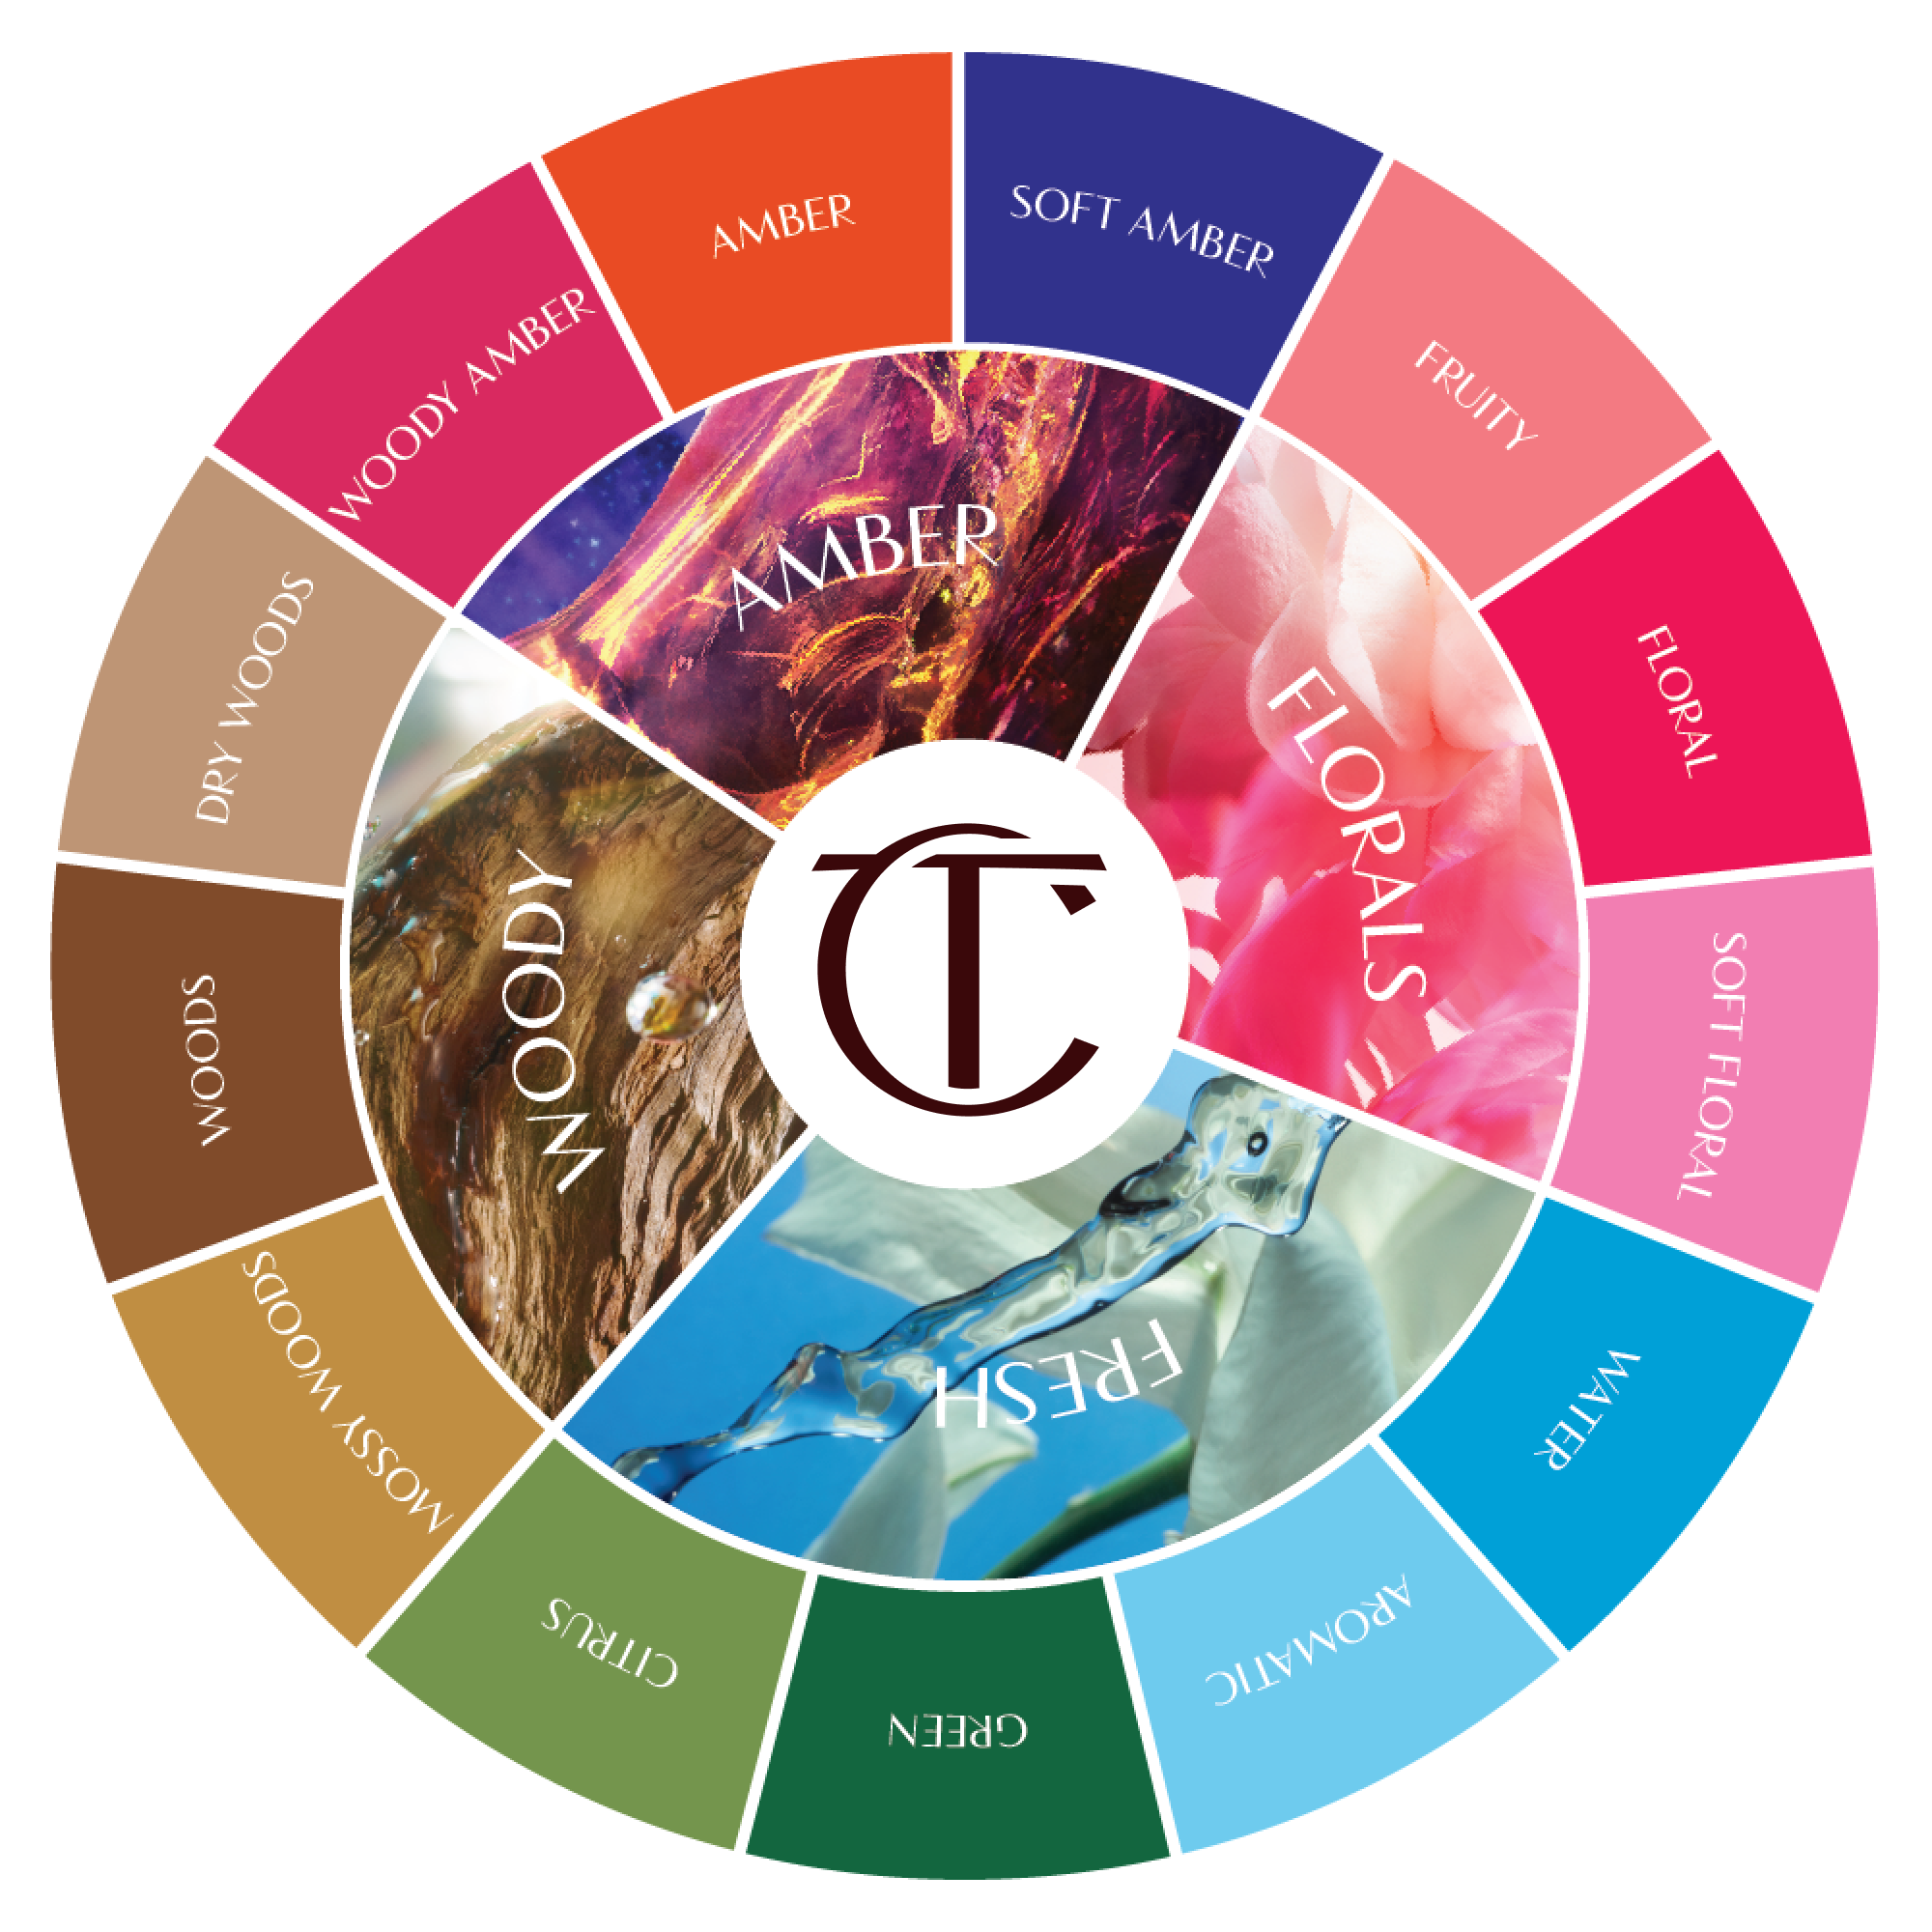 Wheel graphic depicting the different types of fragrance family including fresh, floral, woody and amber families